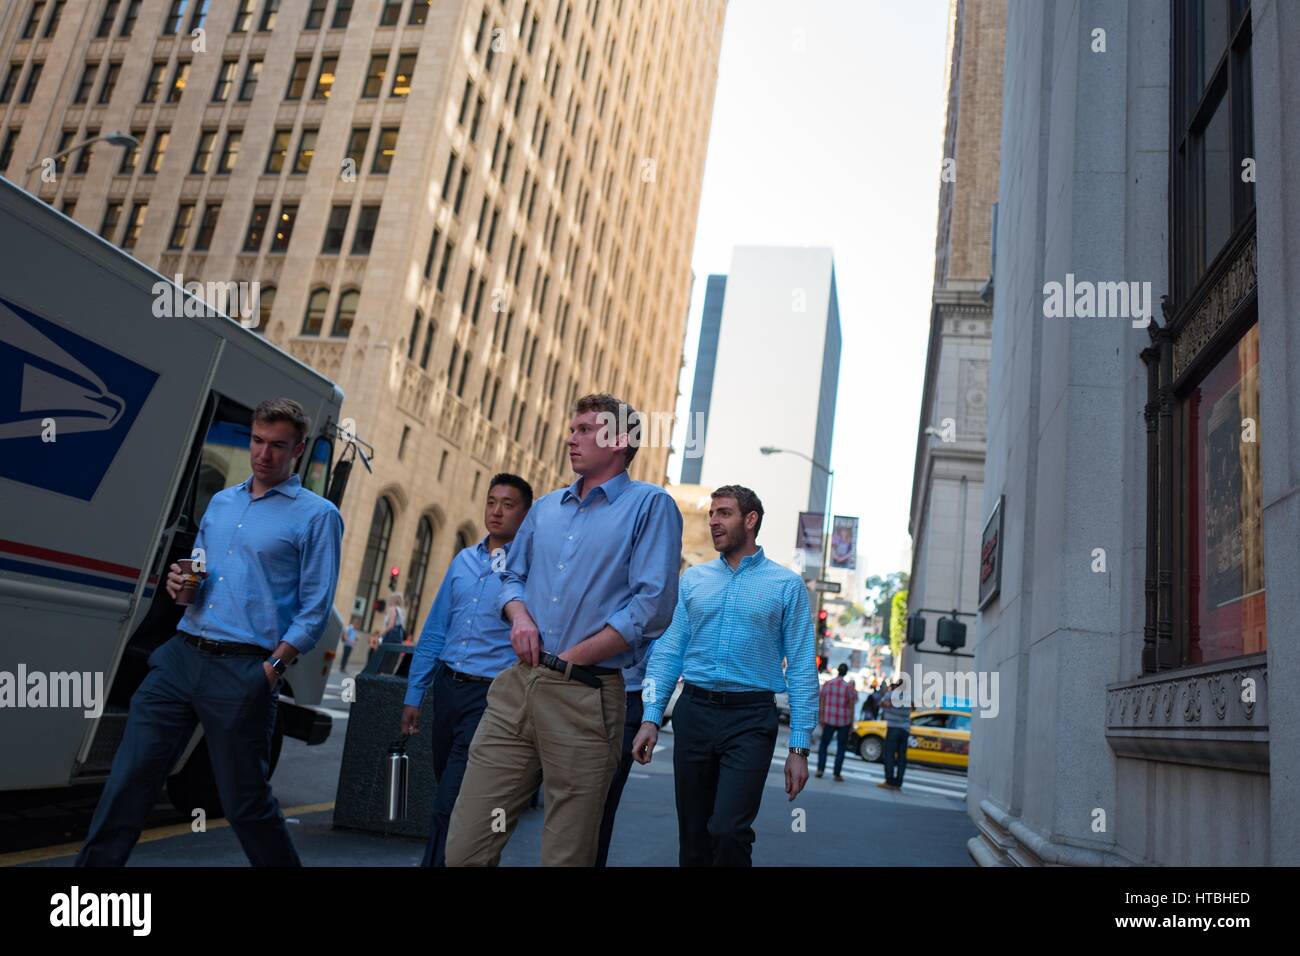 Four young men, possibly bankers, wearing identical blue button down shirts walk past a building in the Financial District neighborhood of San Francisco, California, with one man holding a cup of coffee, September 26, 2016. Stock Photo